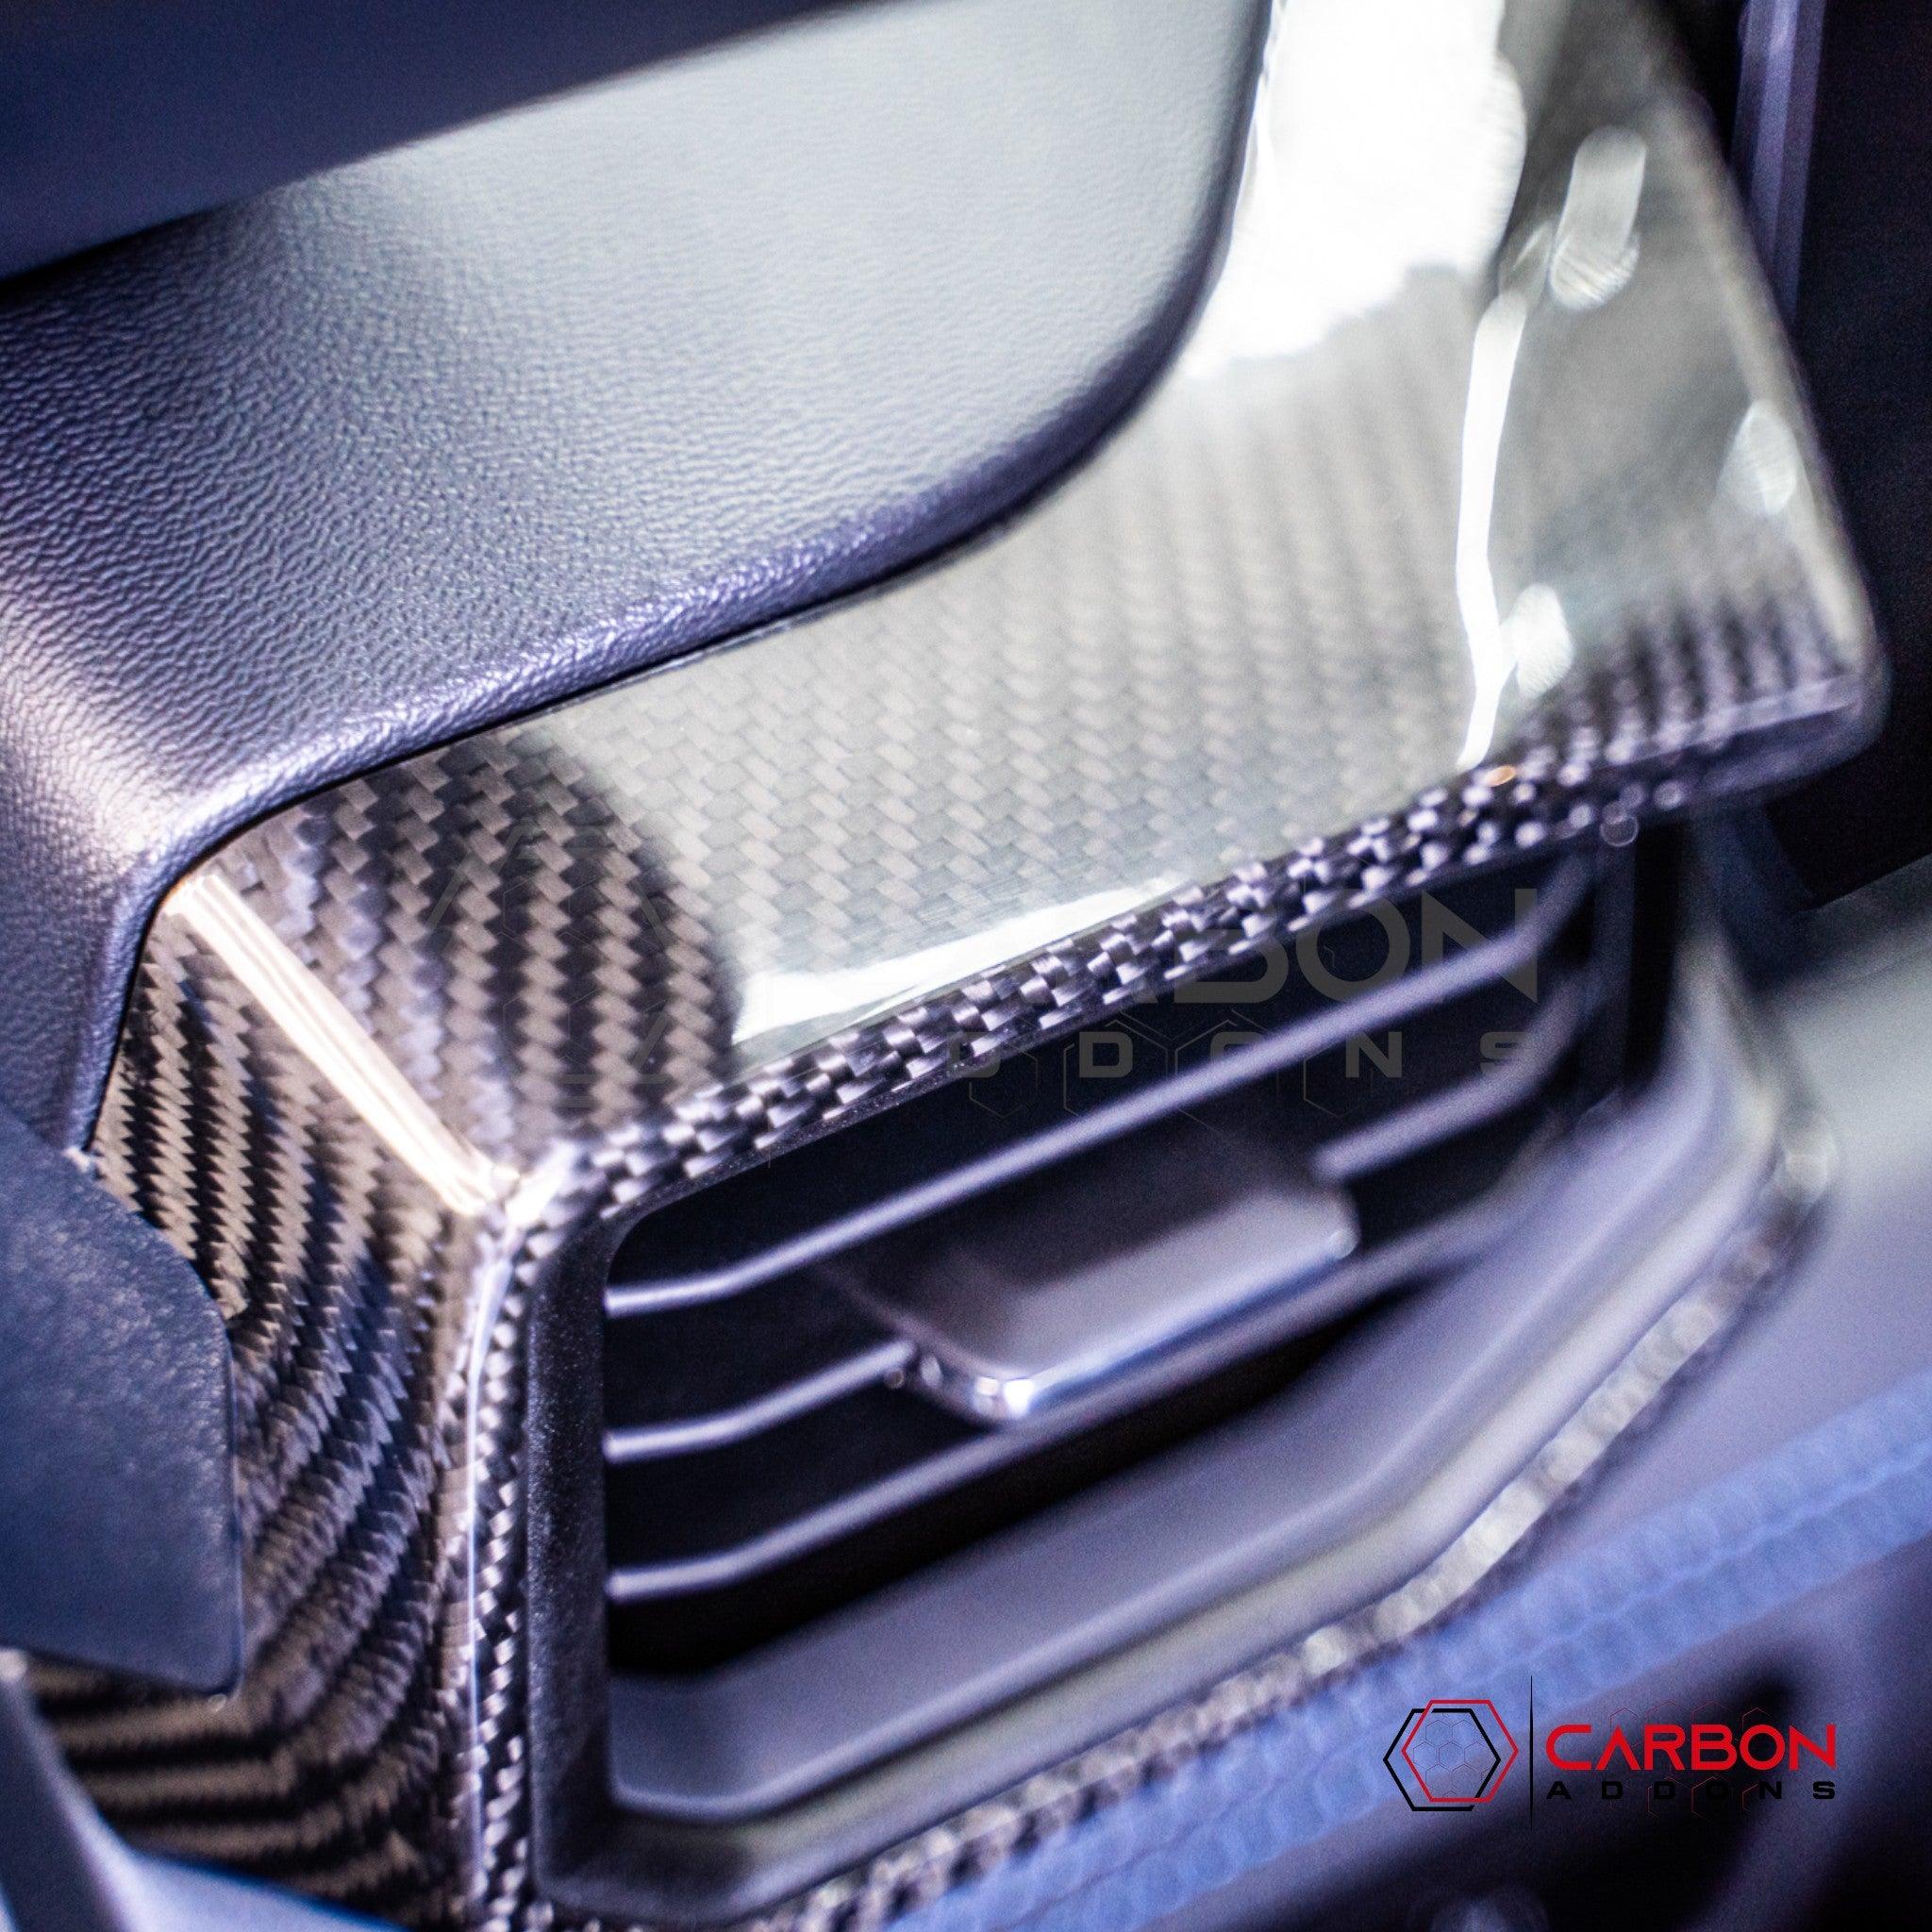 [Coming Soon] 2024-Up S650 Ford Mustang Hard Carbon Fiber Driver Side Dashboard Trim Cover - carbonaddons Carbon Fiber Parts, Accessories, Upgrades, Mods